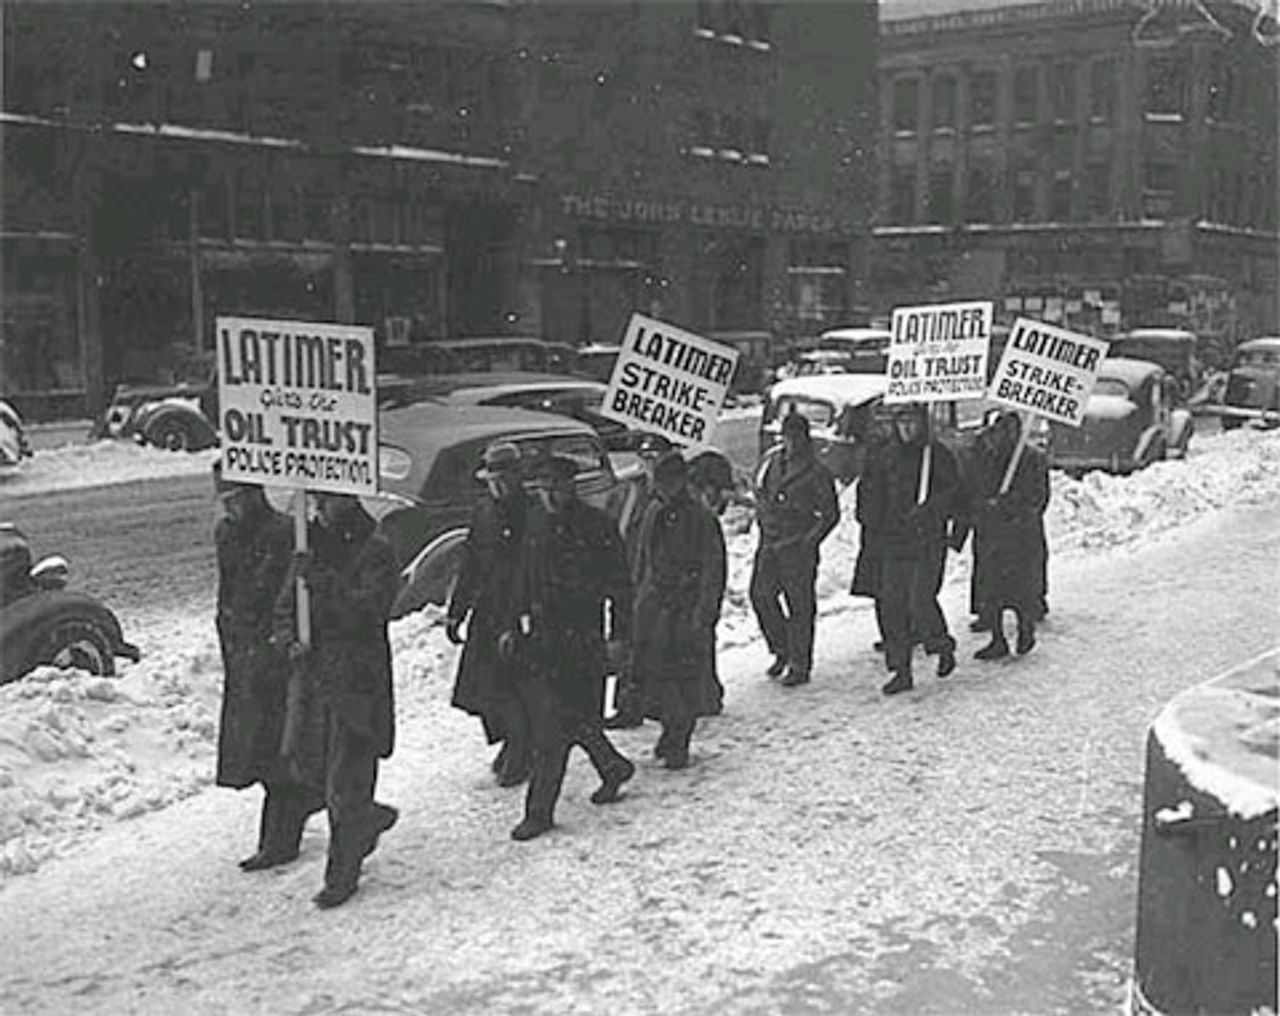 1937: Workers picket Minneapolis City Hall in protest against FLP Mayor Thomas E. Latimer.